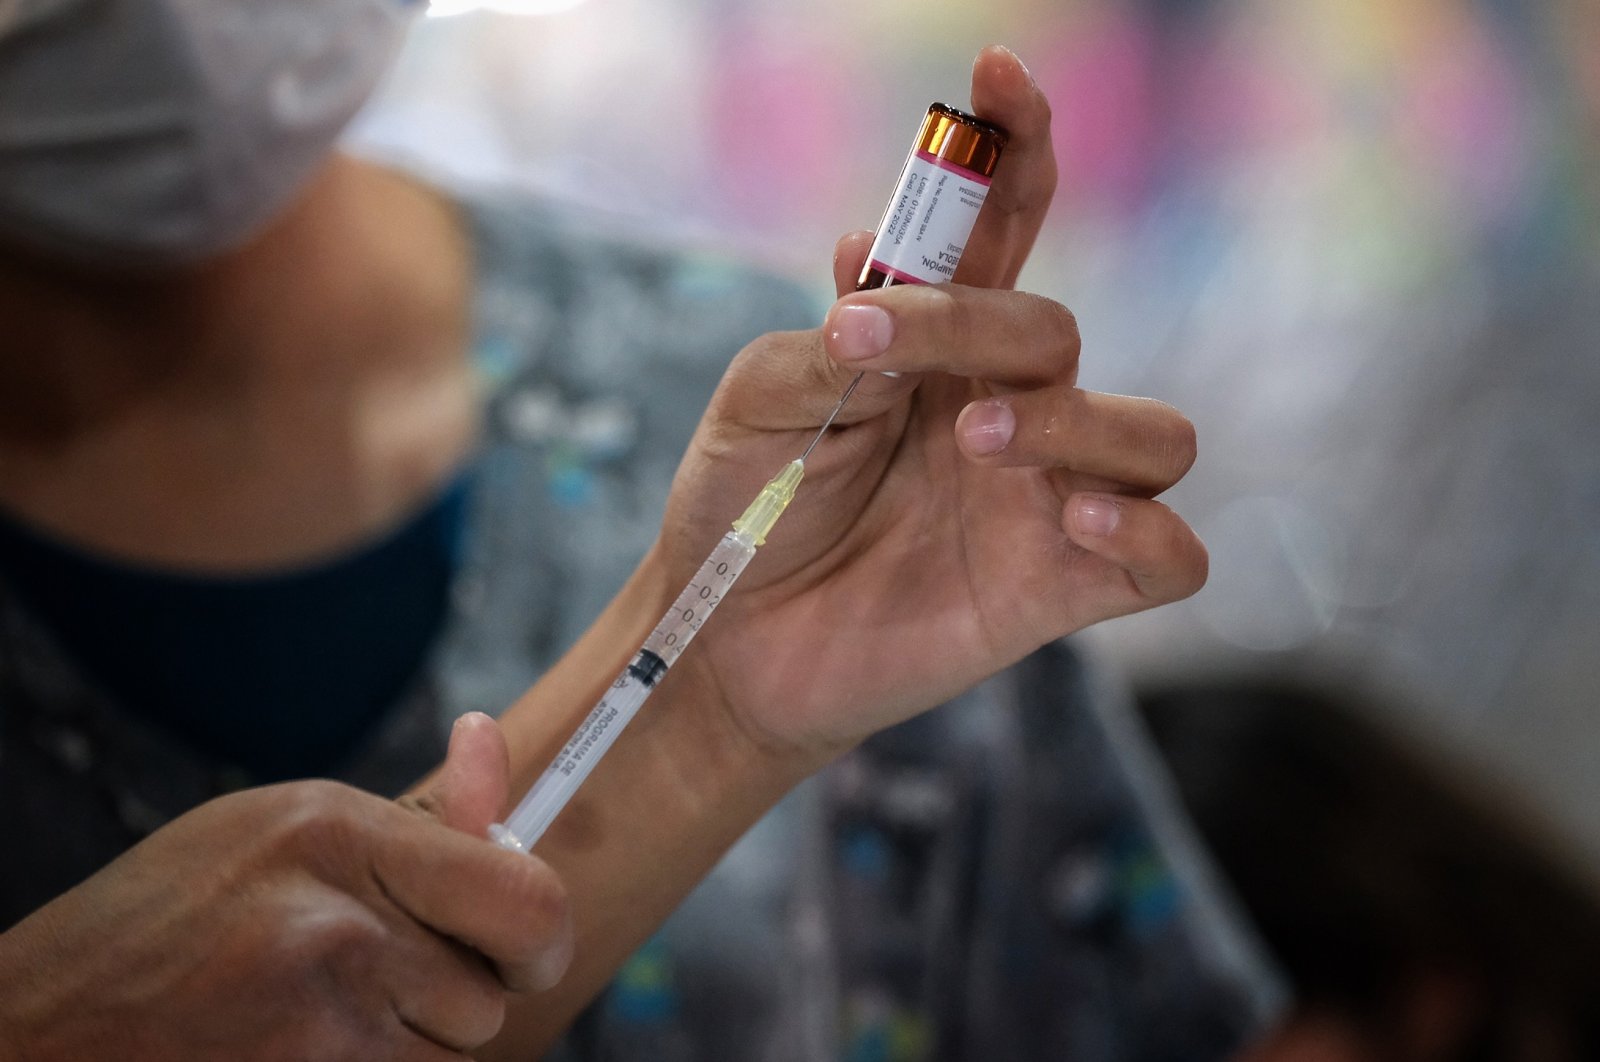 A health care worker prepares a COVID-19 vaccine at a vaccination center in Jalisco, Mexico, March 3, 2022. (Reuters Photo)